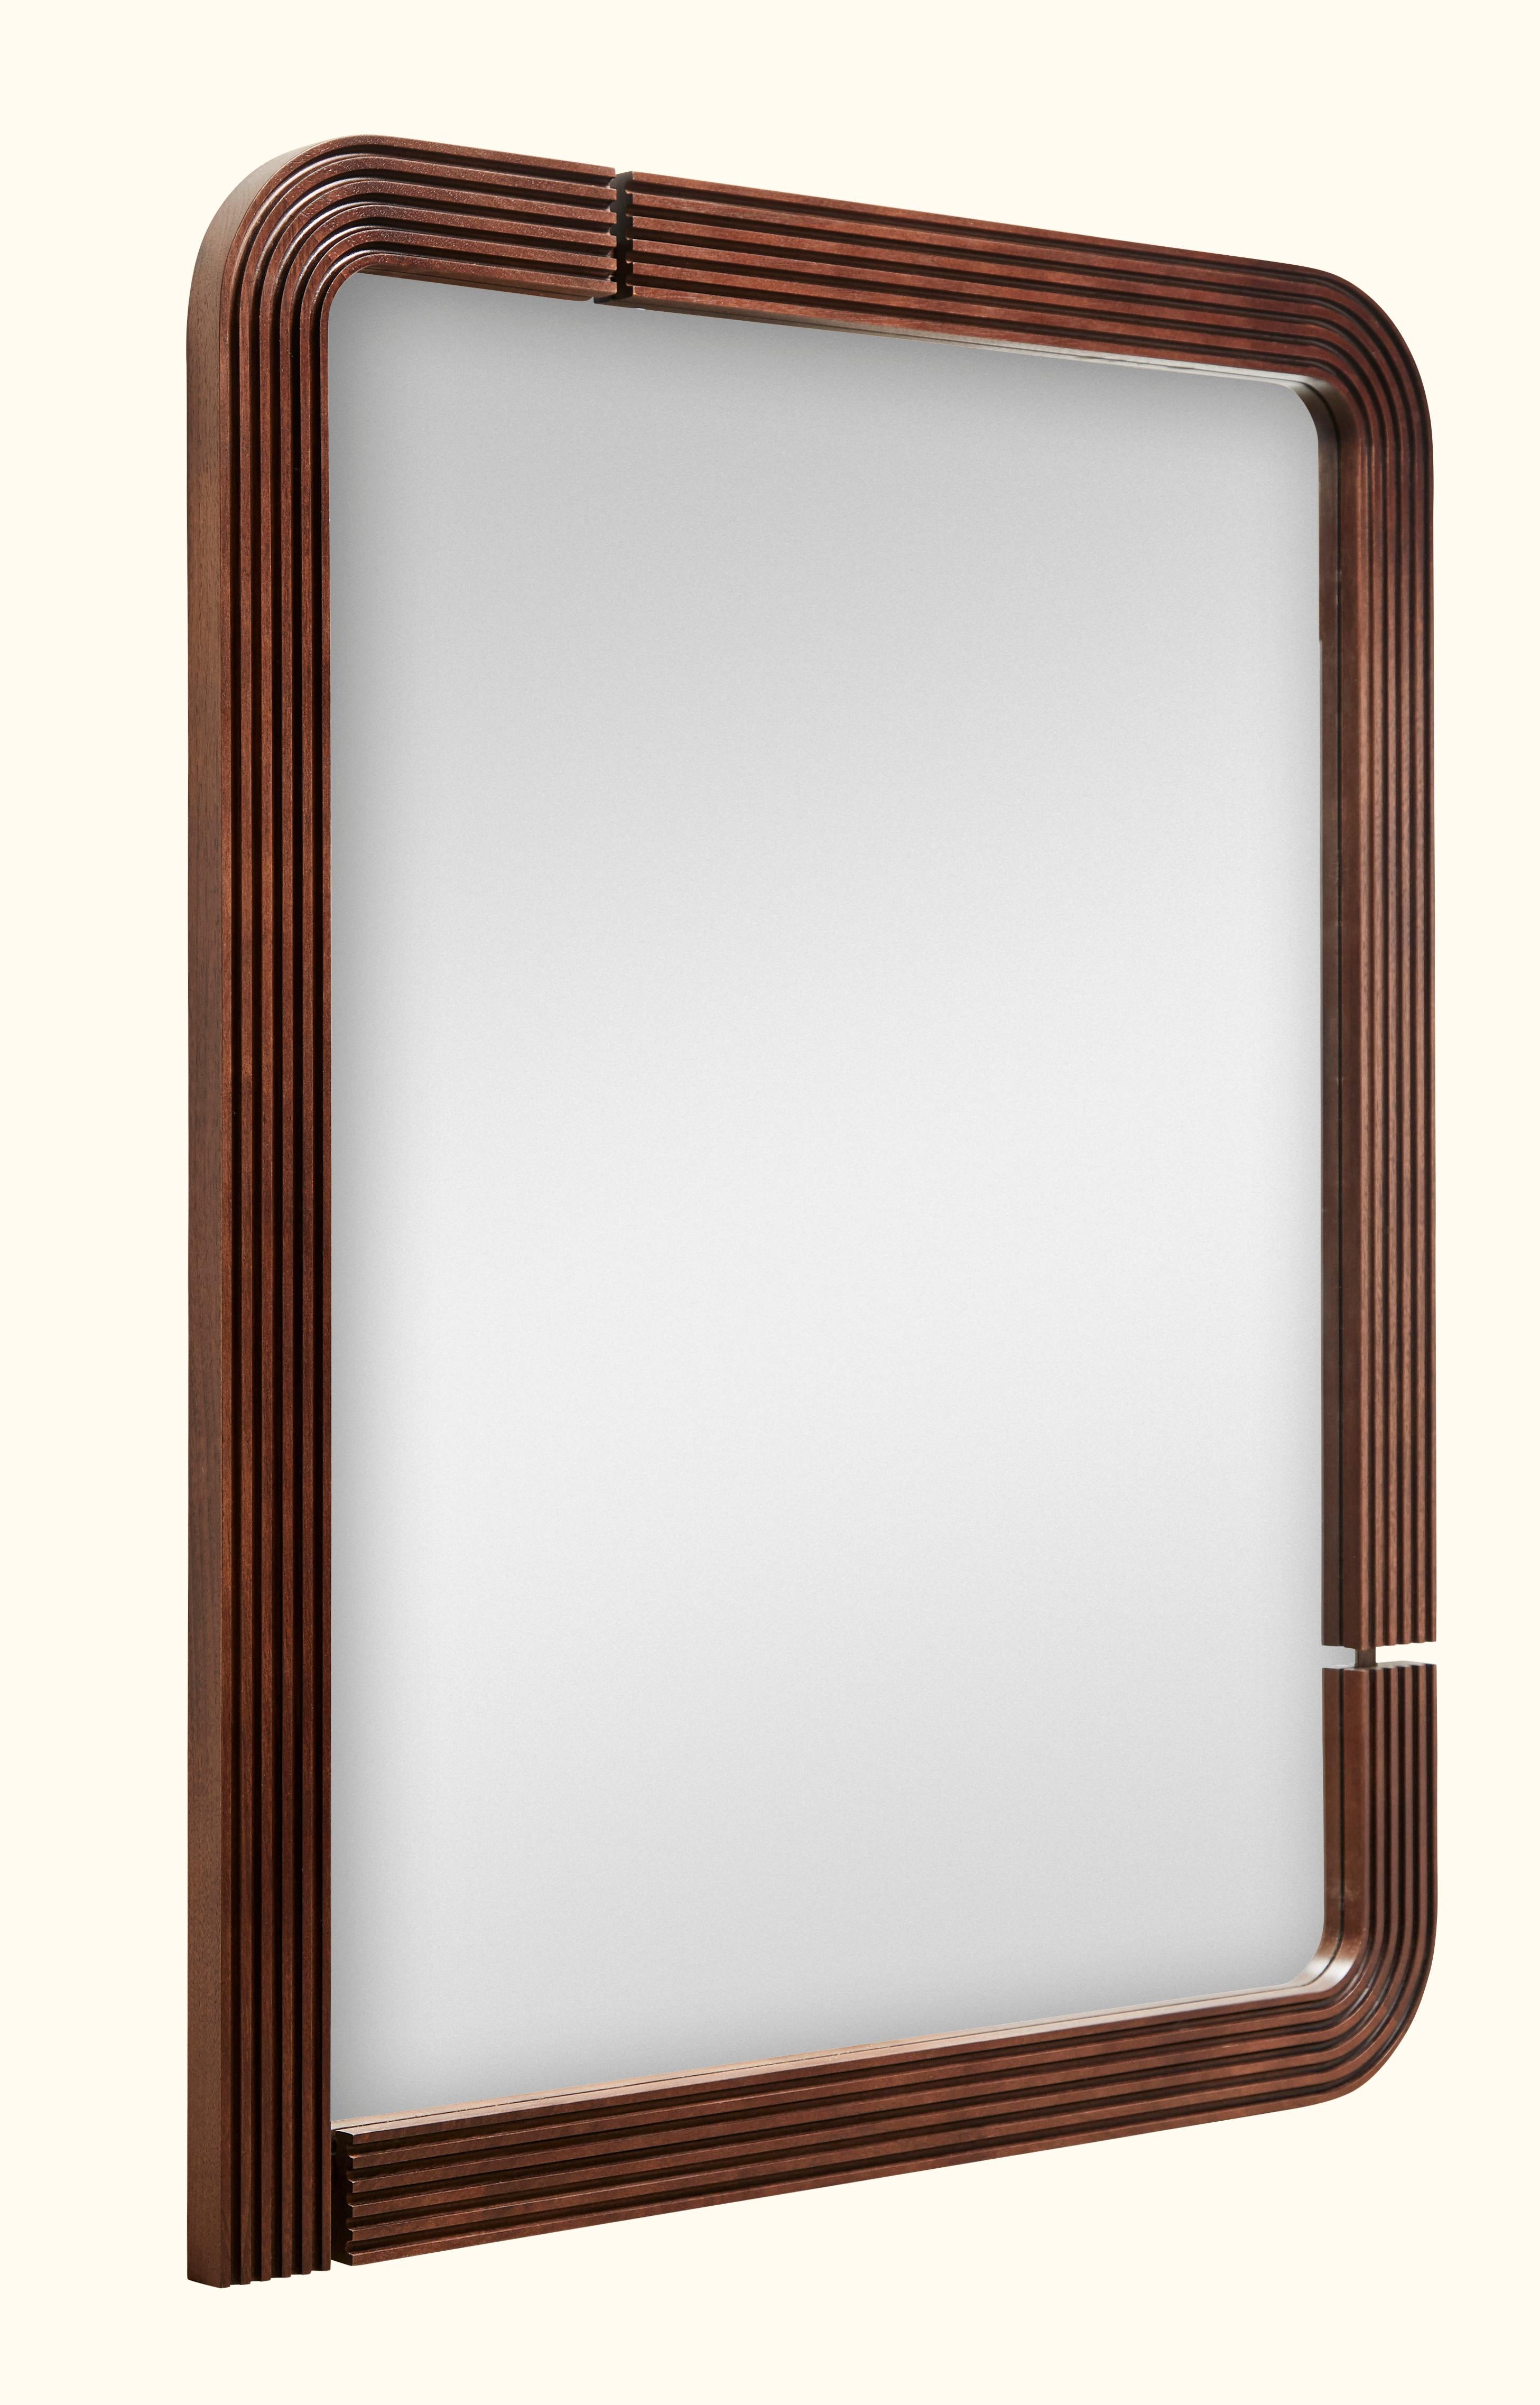 The Ojai mirror features a solid American walnut or white oak frame that is laser cut with a groove detail.

The Lawson-Fenning Collection is designed and handmade in Los Angeles, California. 

Contact us to find out what finishes are currently in